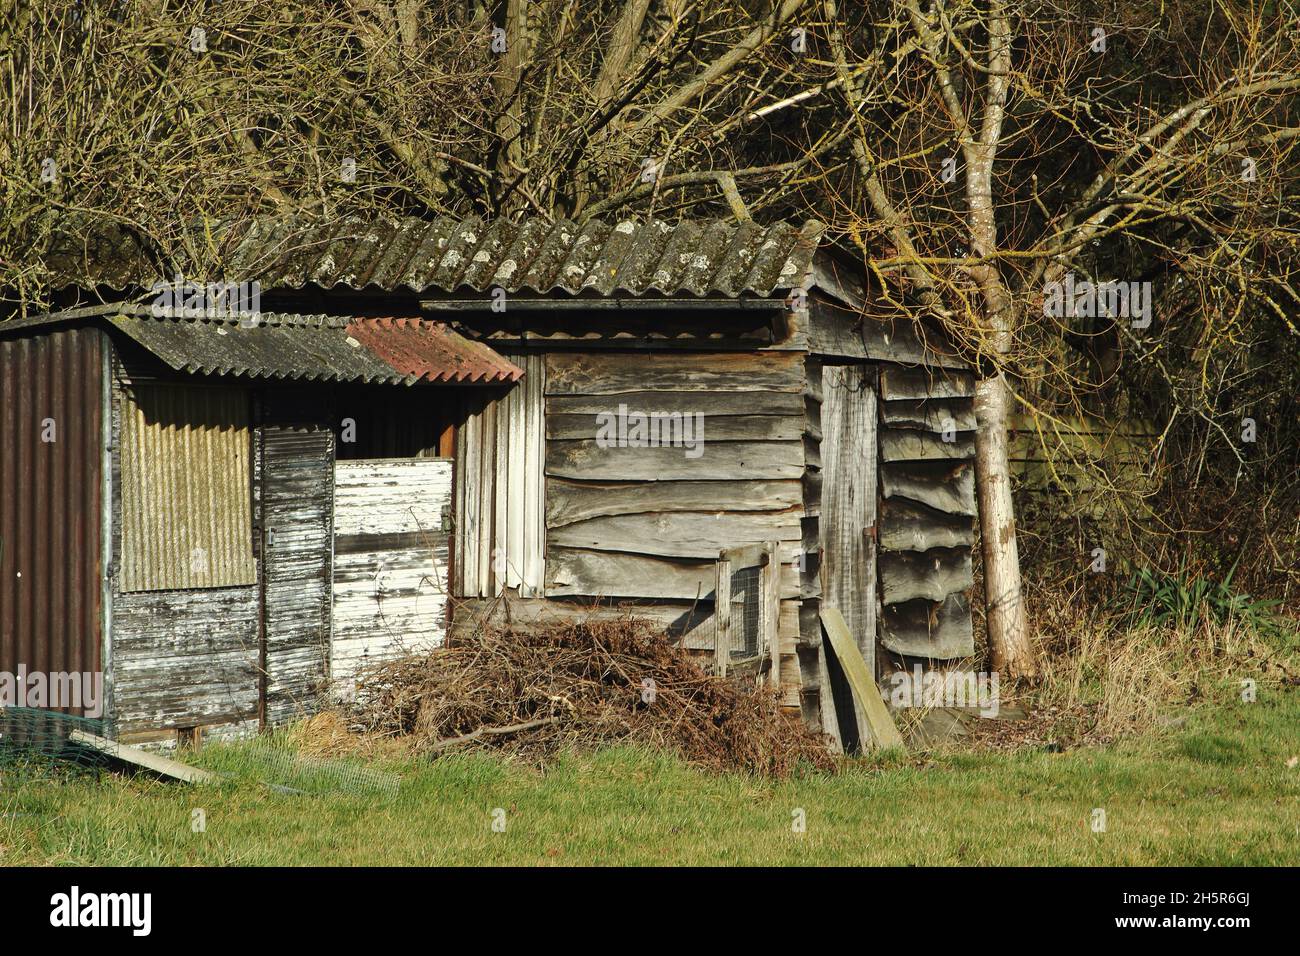 Small old wooden shed surrounded by grass and forest. Construction with wood and junk materials. Roof with asbestos plates. Stock Photo